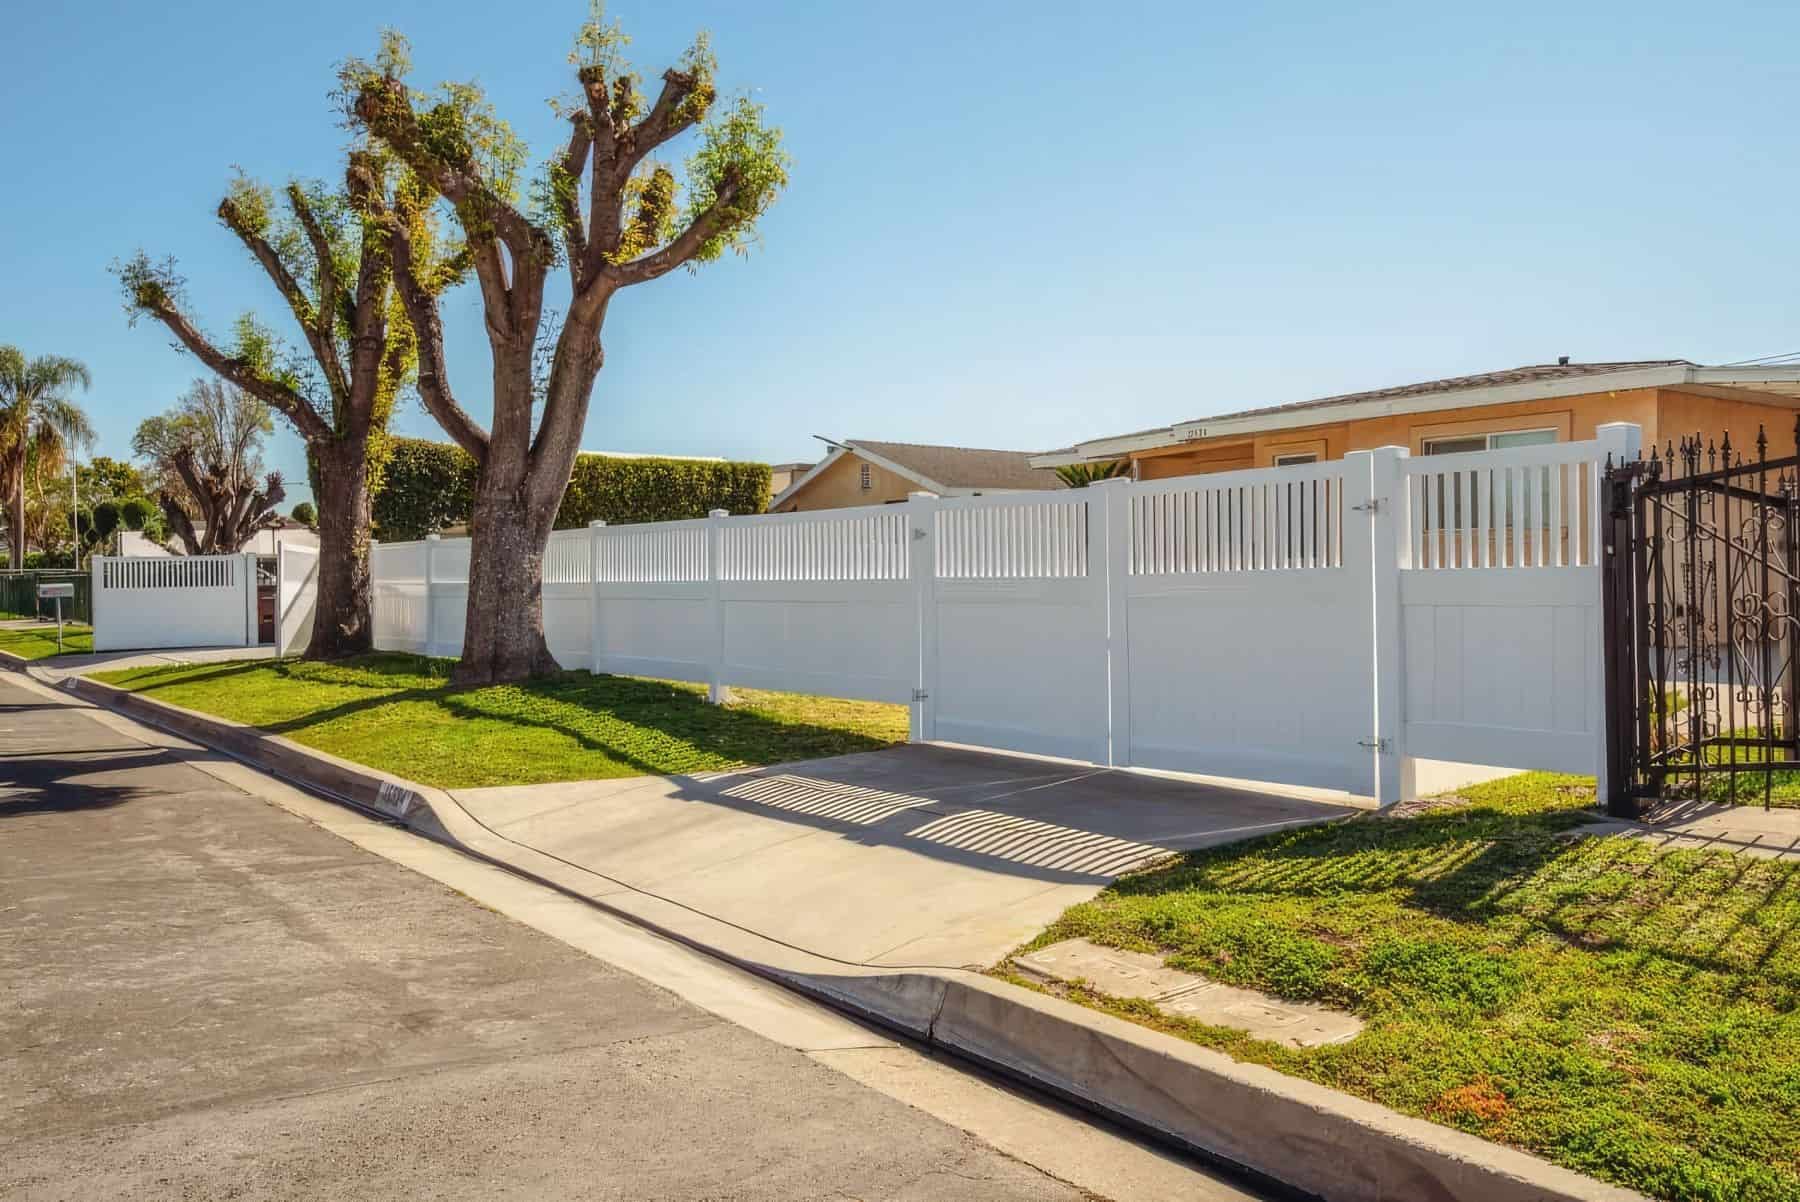 Vinyl fence gate & concrete sidewalk leading to a lush grassy lawn with trees in the background. Serene outdoor scene.